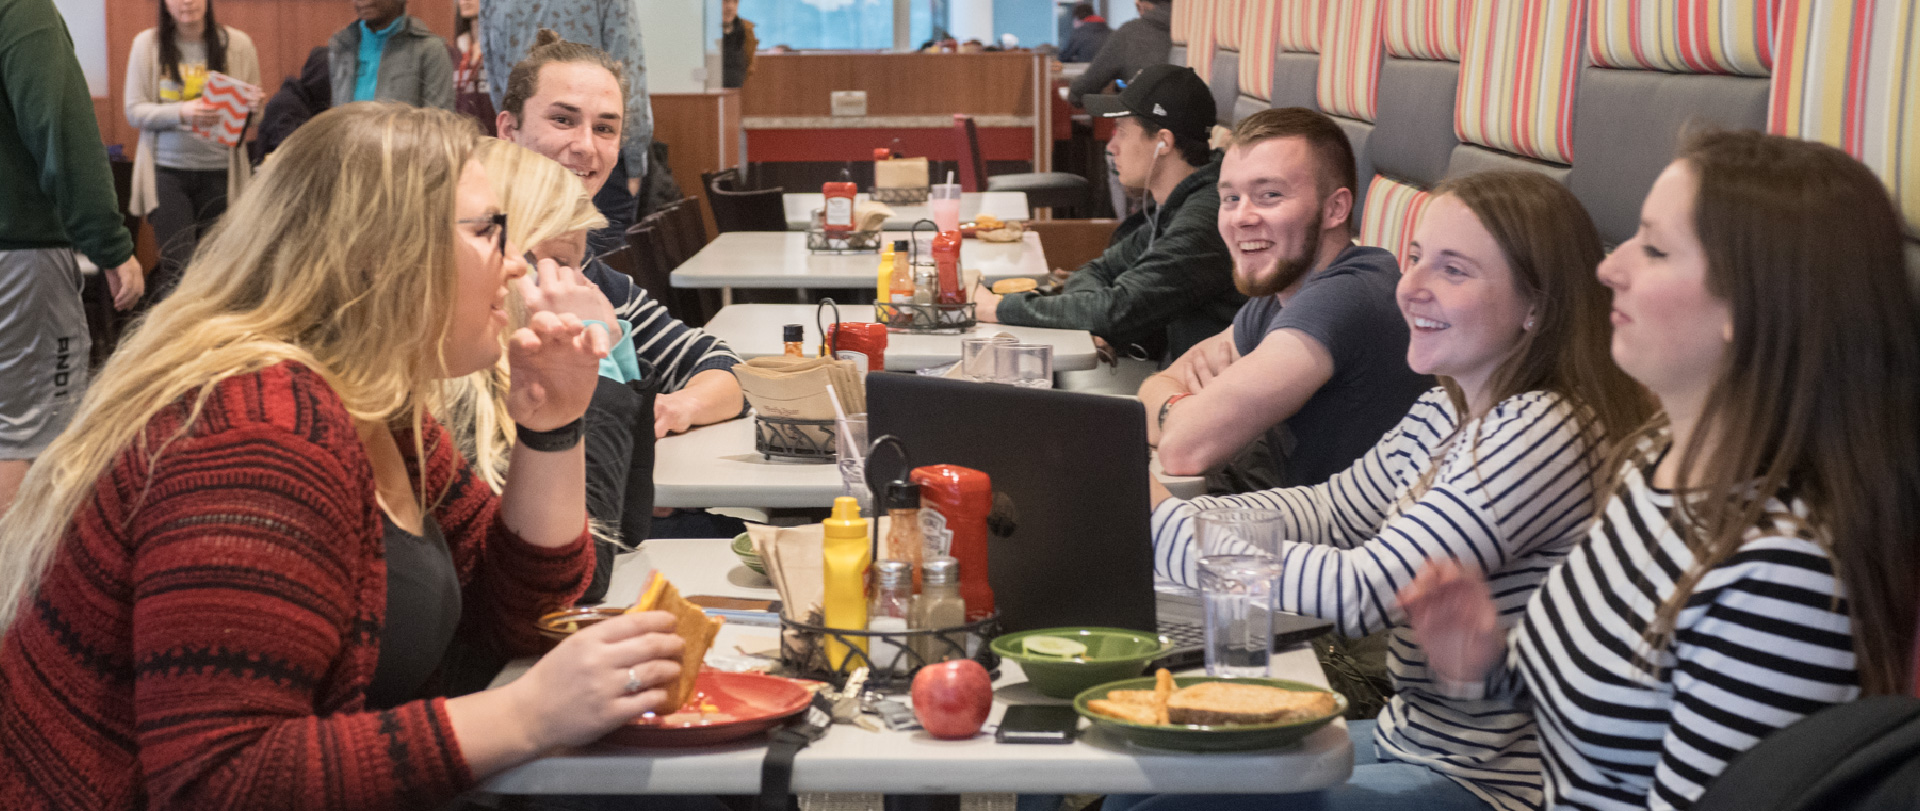 Students dining at the Quad Cafe on the campus of Ferris State University in Big Rapids, MI